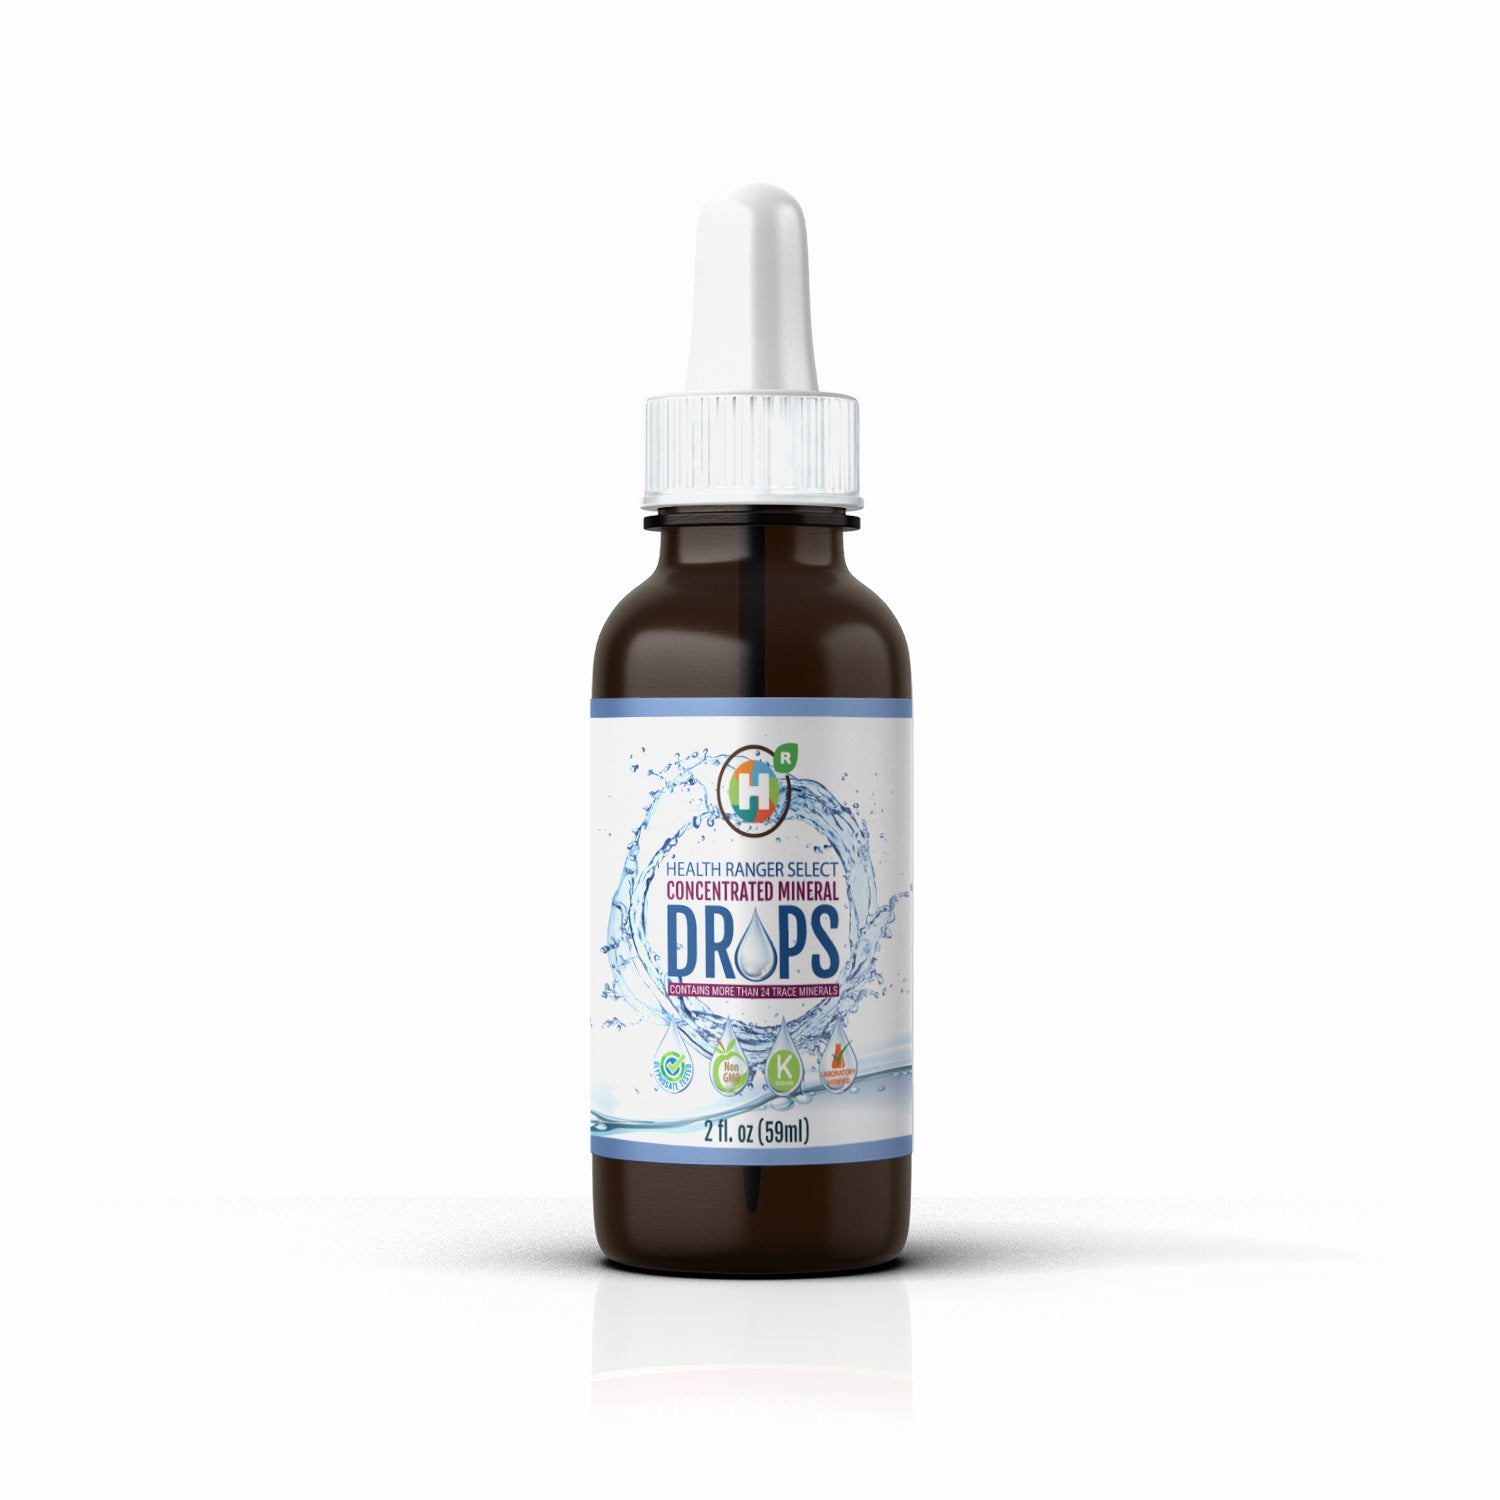 Concentrated Mineral Drops 2 fl oz (59ml)